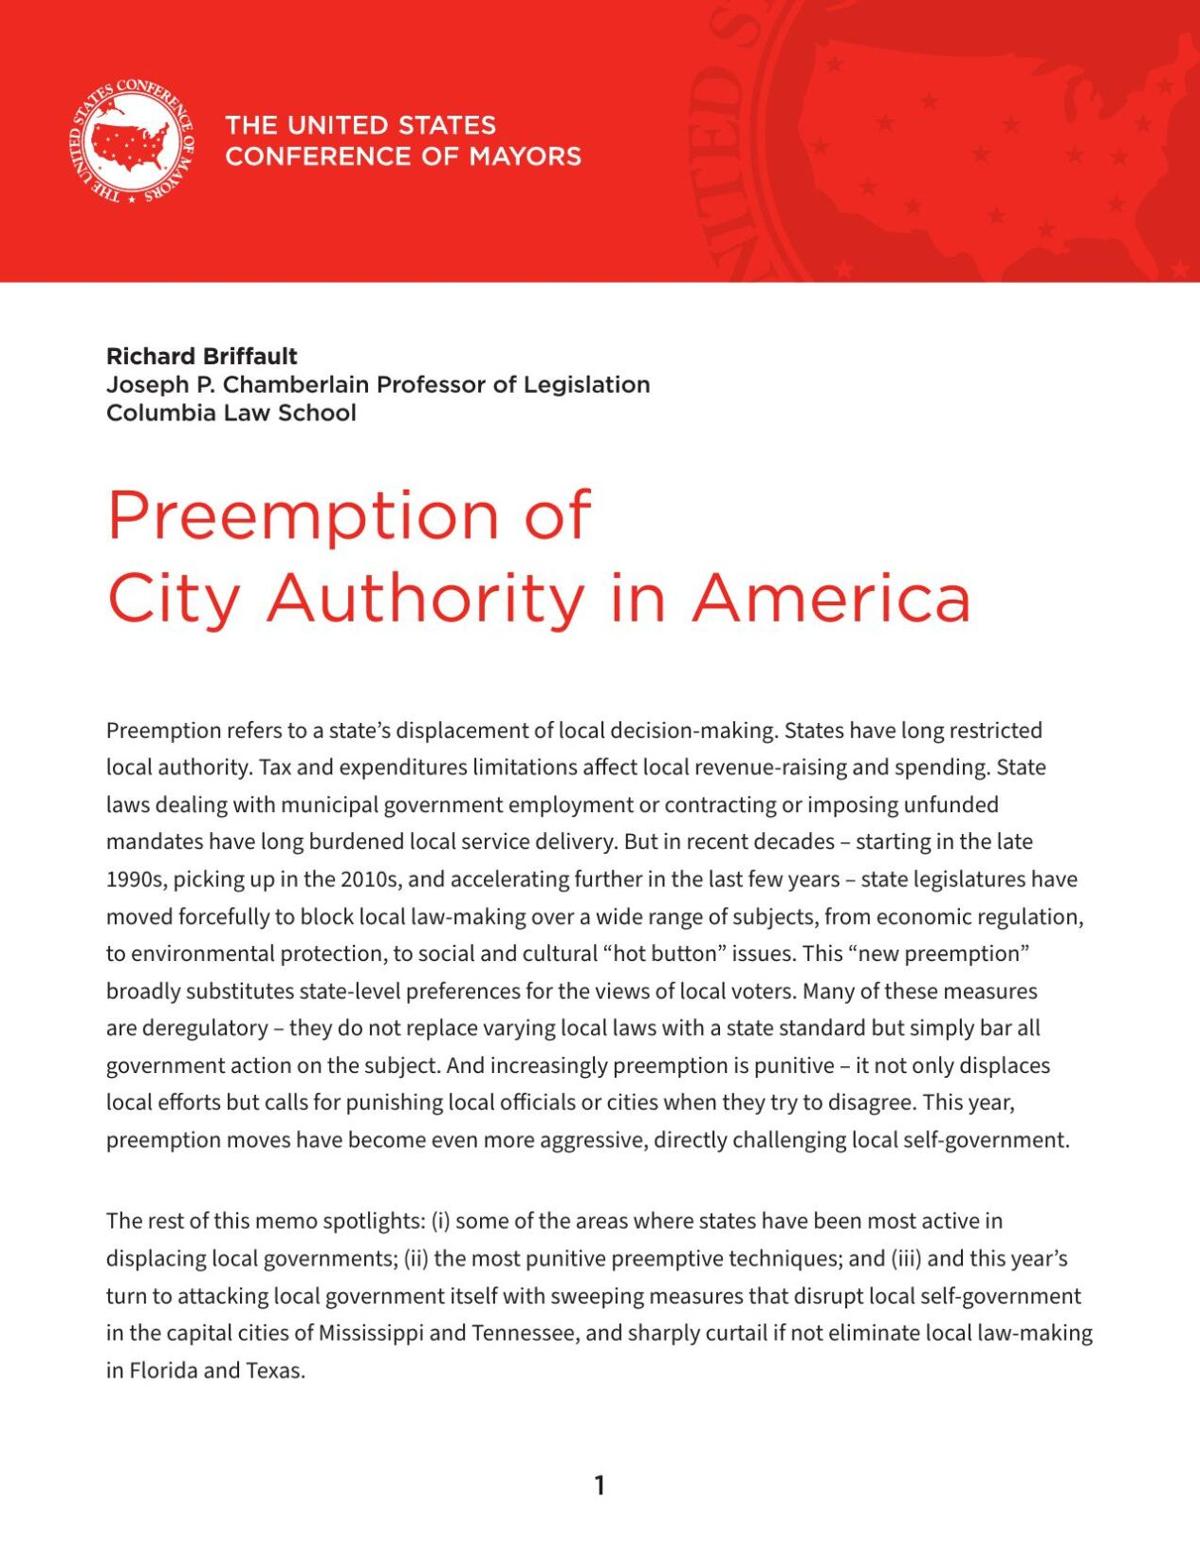 US Conference of Mayors report